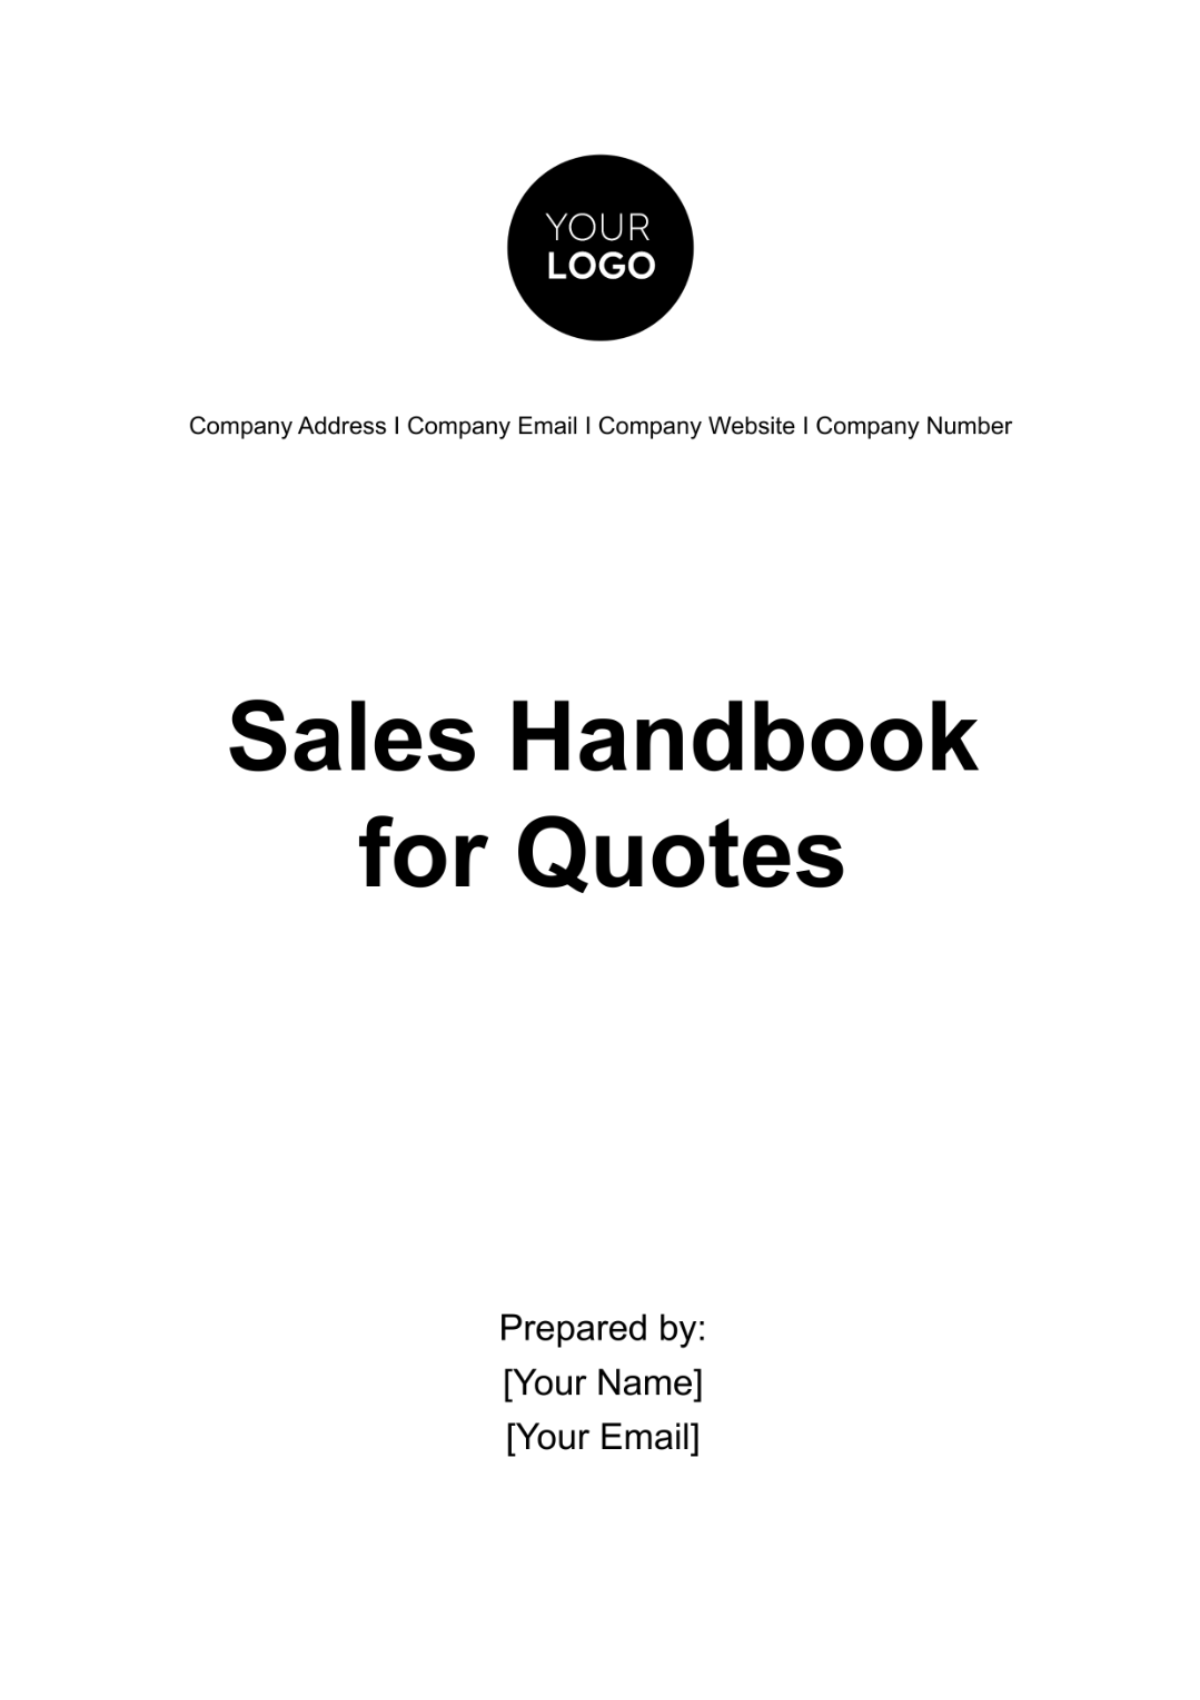 Free Sales Handbook for Quotes Template